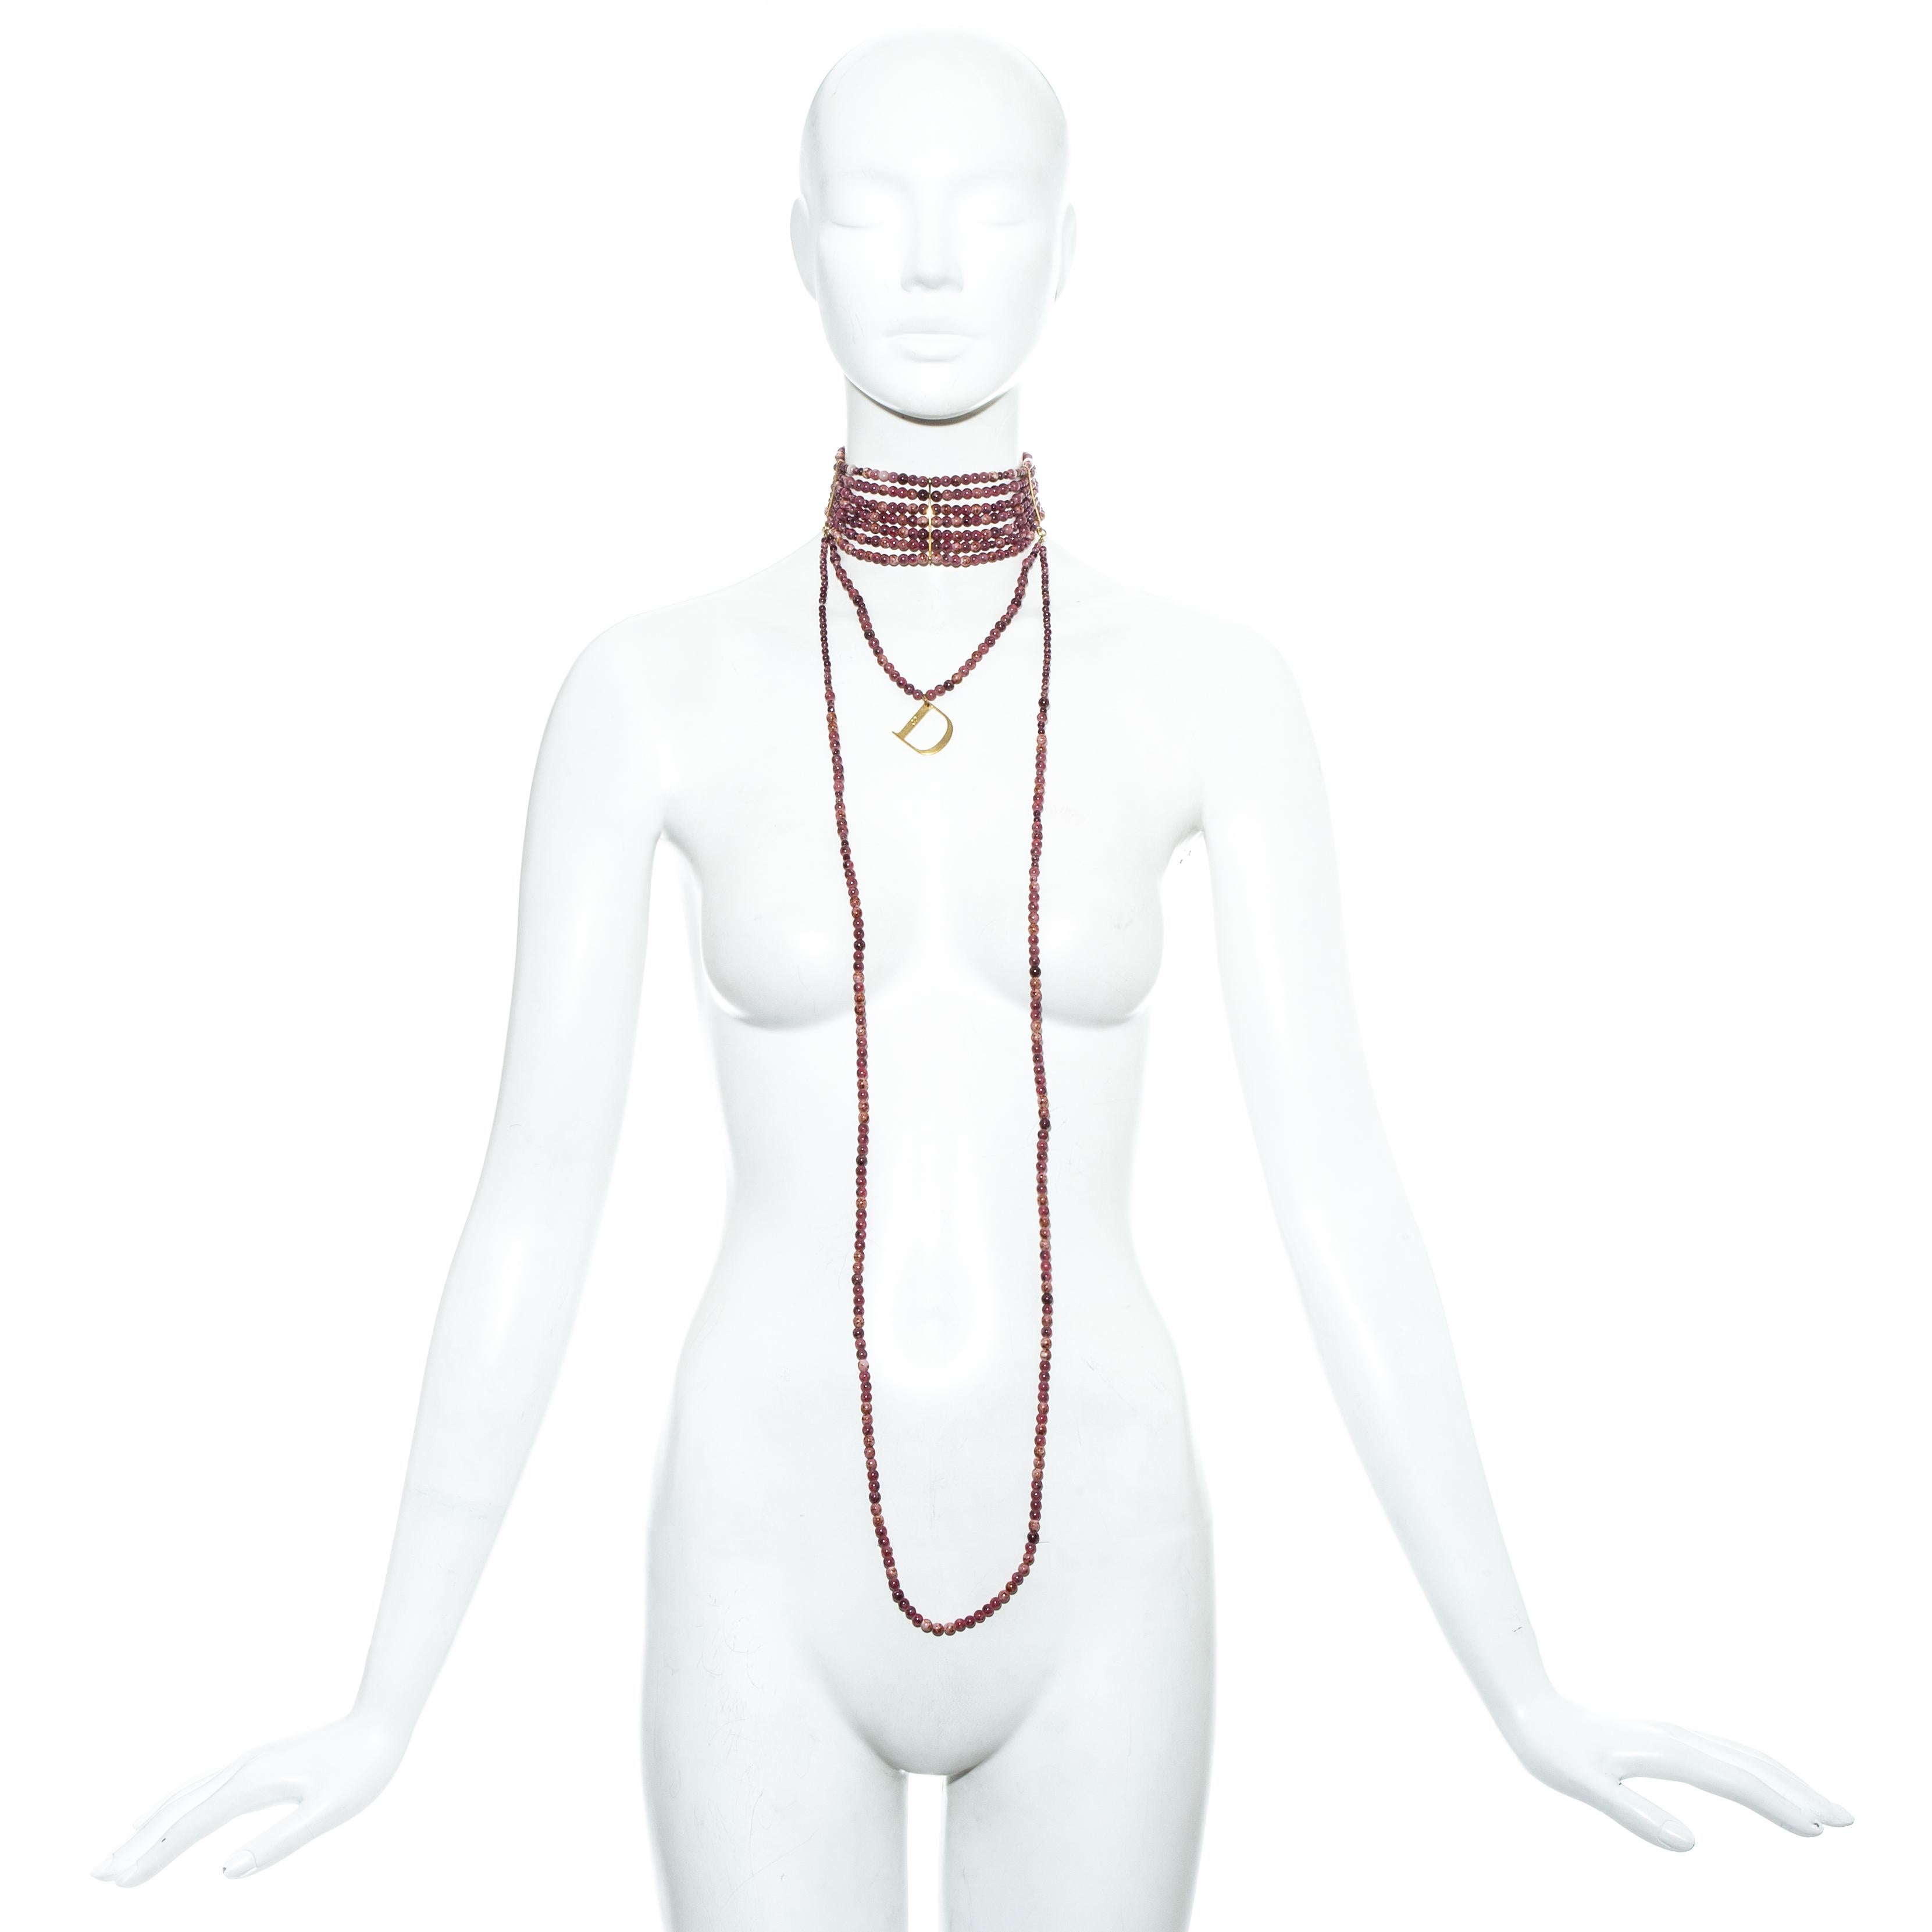 Christian Dior by John Galliano; Pink marble glass bead Maasai choker necklace

- 7 beaded stands
- 2 long beaded strands, which can be wrapped around twice to shorten length
- Signature gold Dior 'D' pendent
- 3 gold metal bands which sculpt the